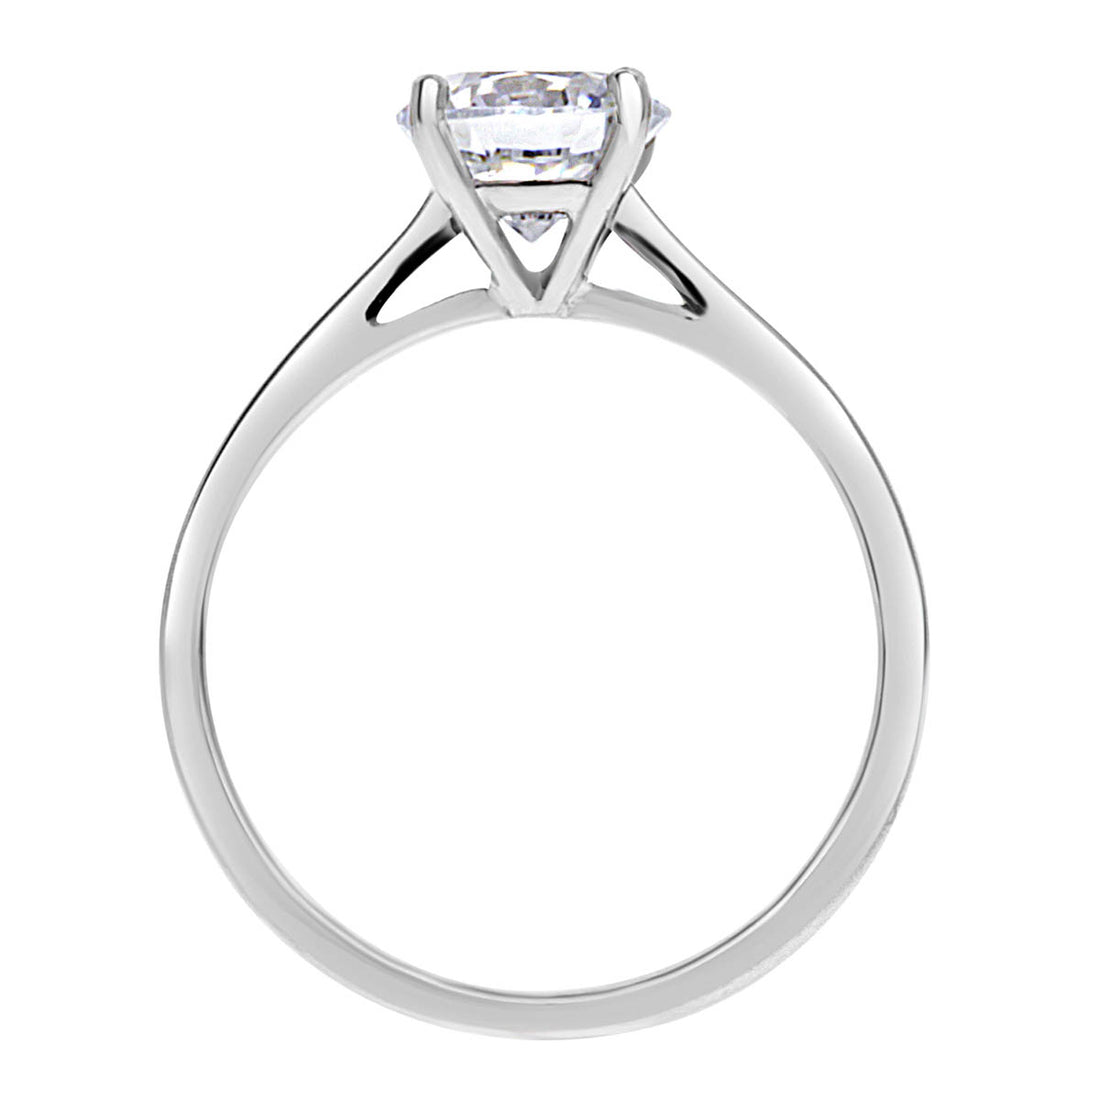 Solitaire Engagement Ring in platinum pictured standing upright